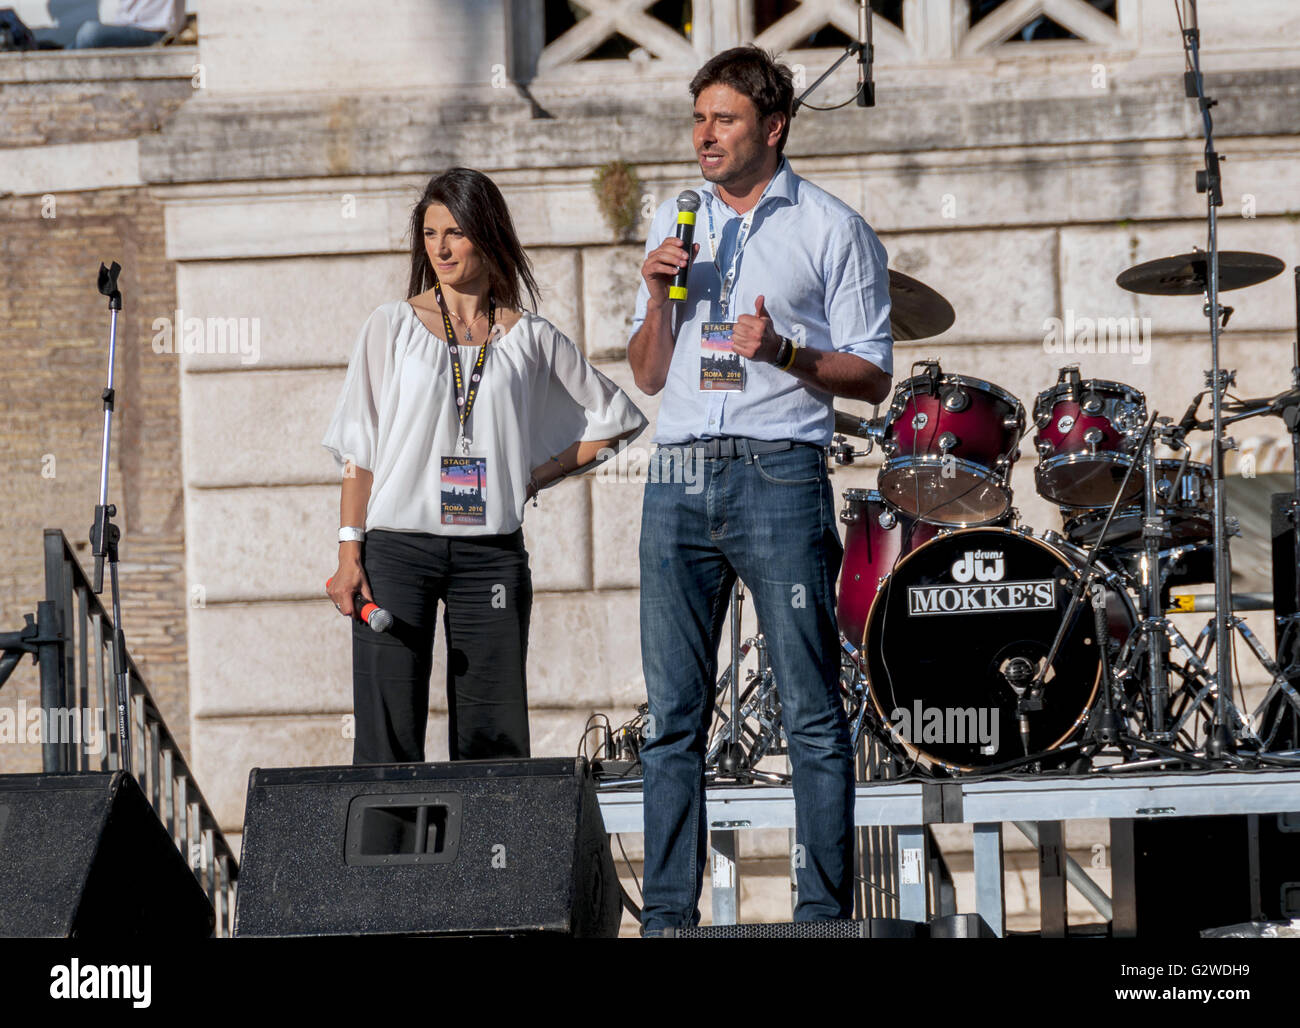 Rome, Italy. 03rd June, 2016. The candidate for mayor of Rome Virginia Raggi and Alessandro Battista of the Movement 5 Stars (M5S) on the stage in Piazza del Popolo for the final rally of the campaign Credit:  Patrizia Cortellessa/Alamy Live News Stock Photo